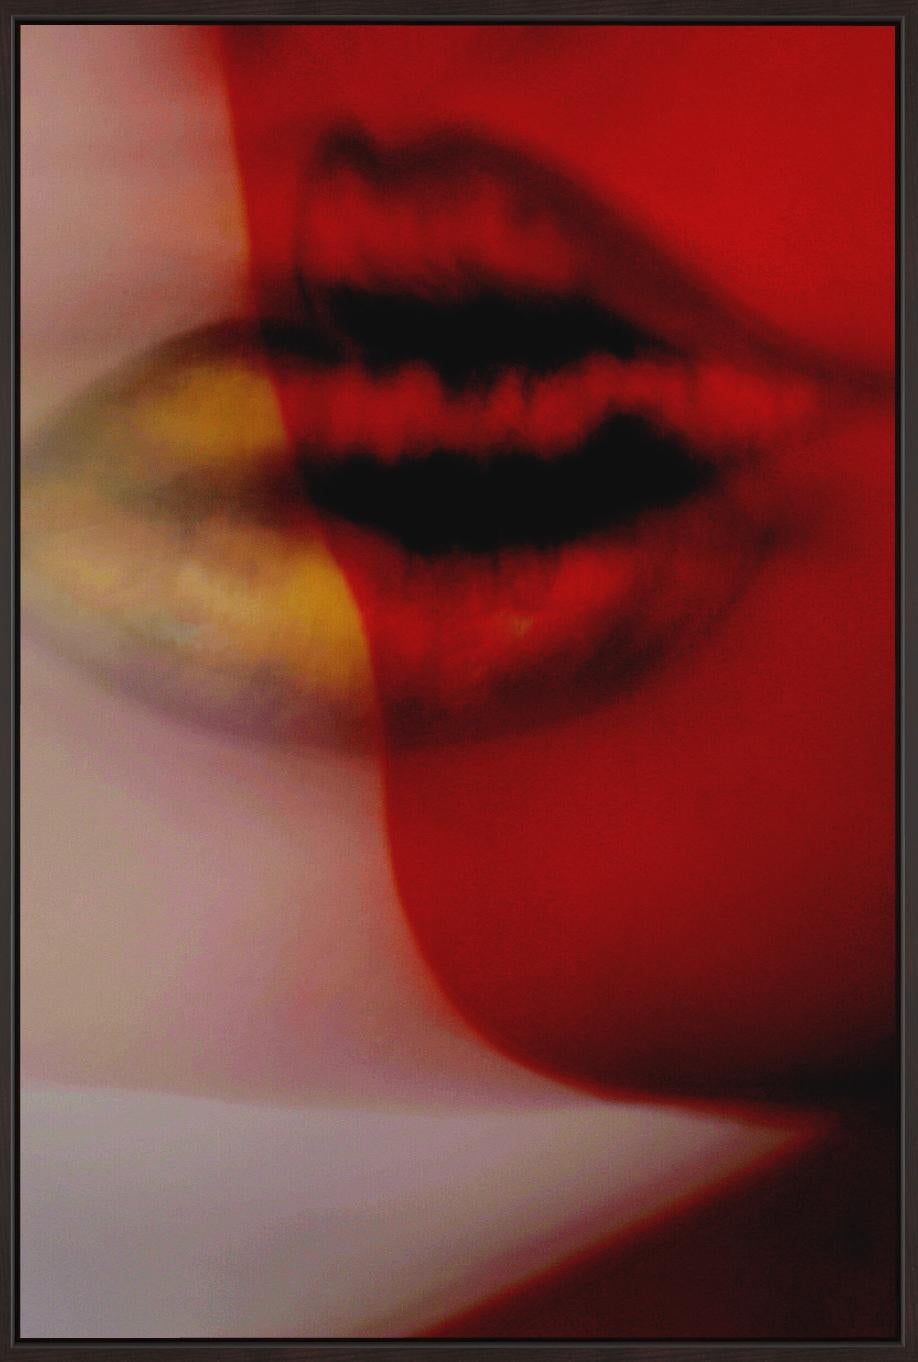 Kuss - Abstract Expressionist Art Photography - Red Abstract Photograph by Roger Reist